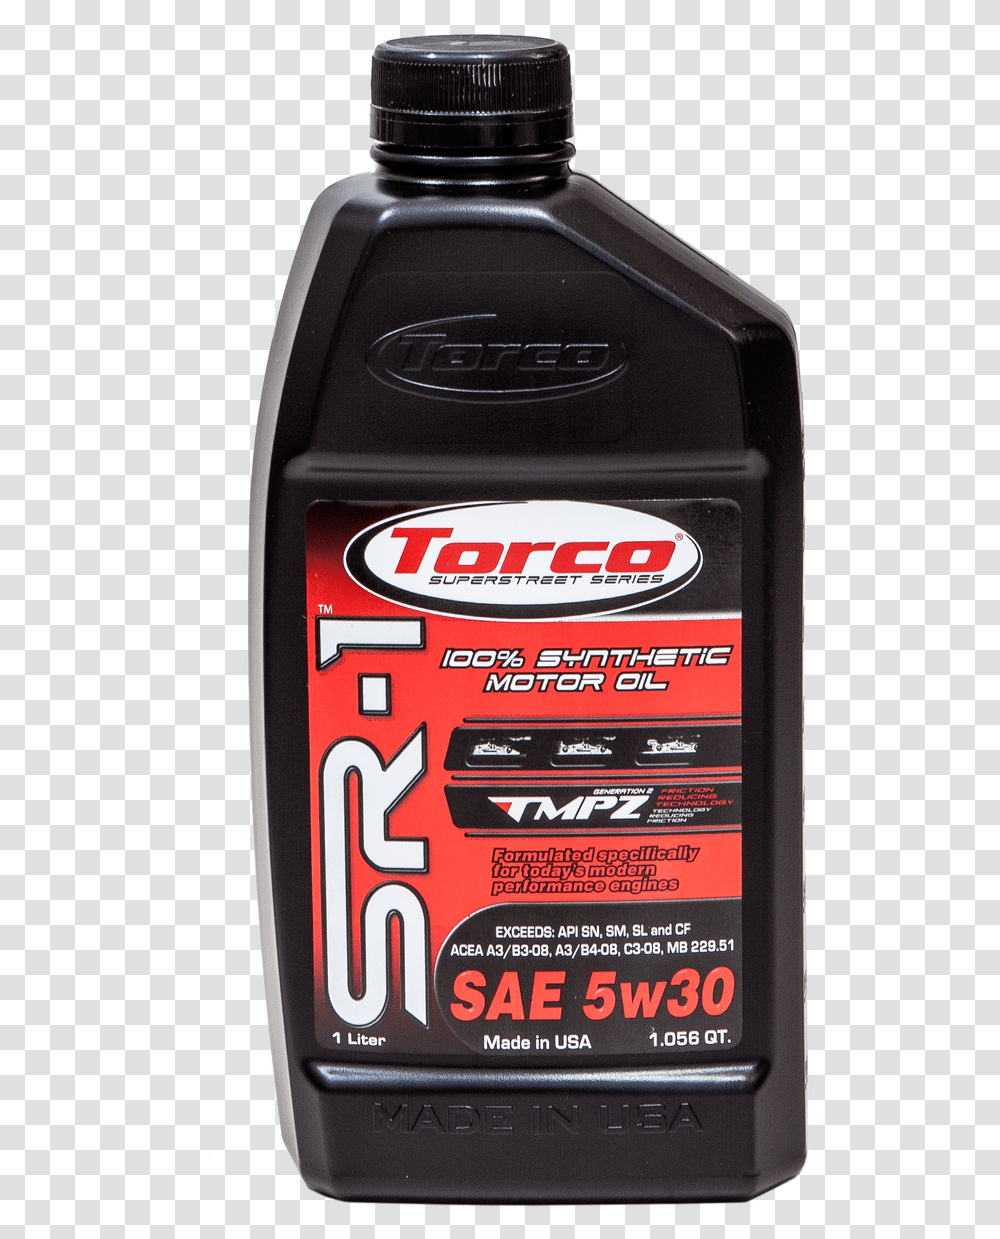 Torco Sr 1 Synthetic Motor Oil 5w30 Torco Sr 1, Mobile Phone, Electronics, Cell Phone, Cosmetics Transparent Png